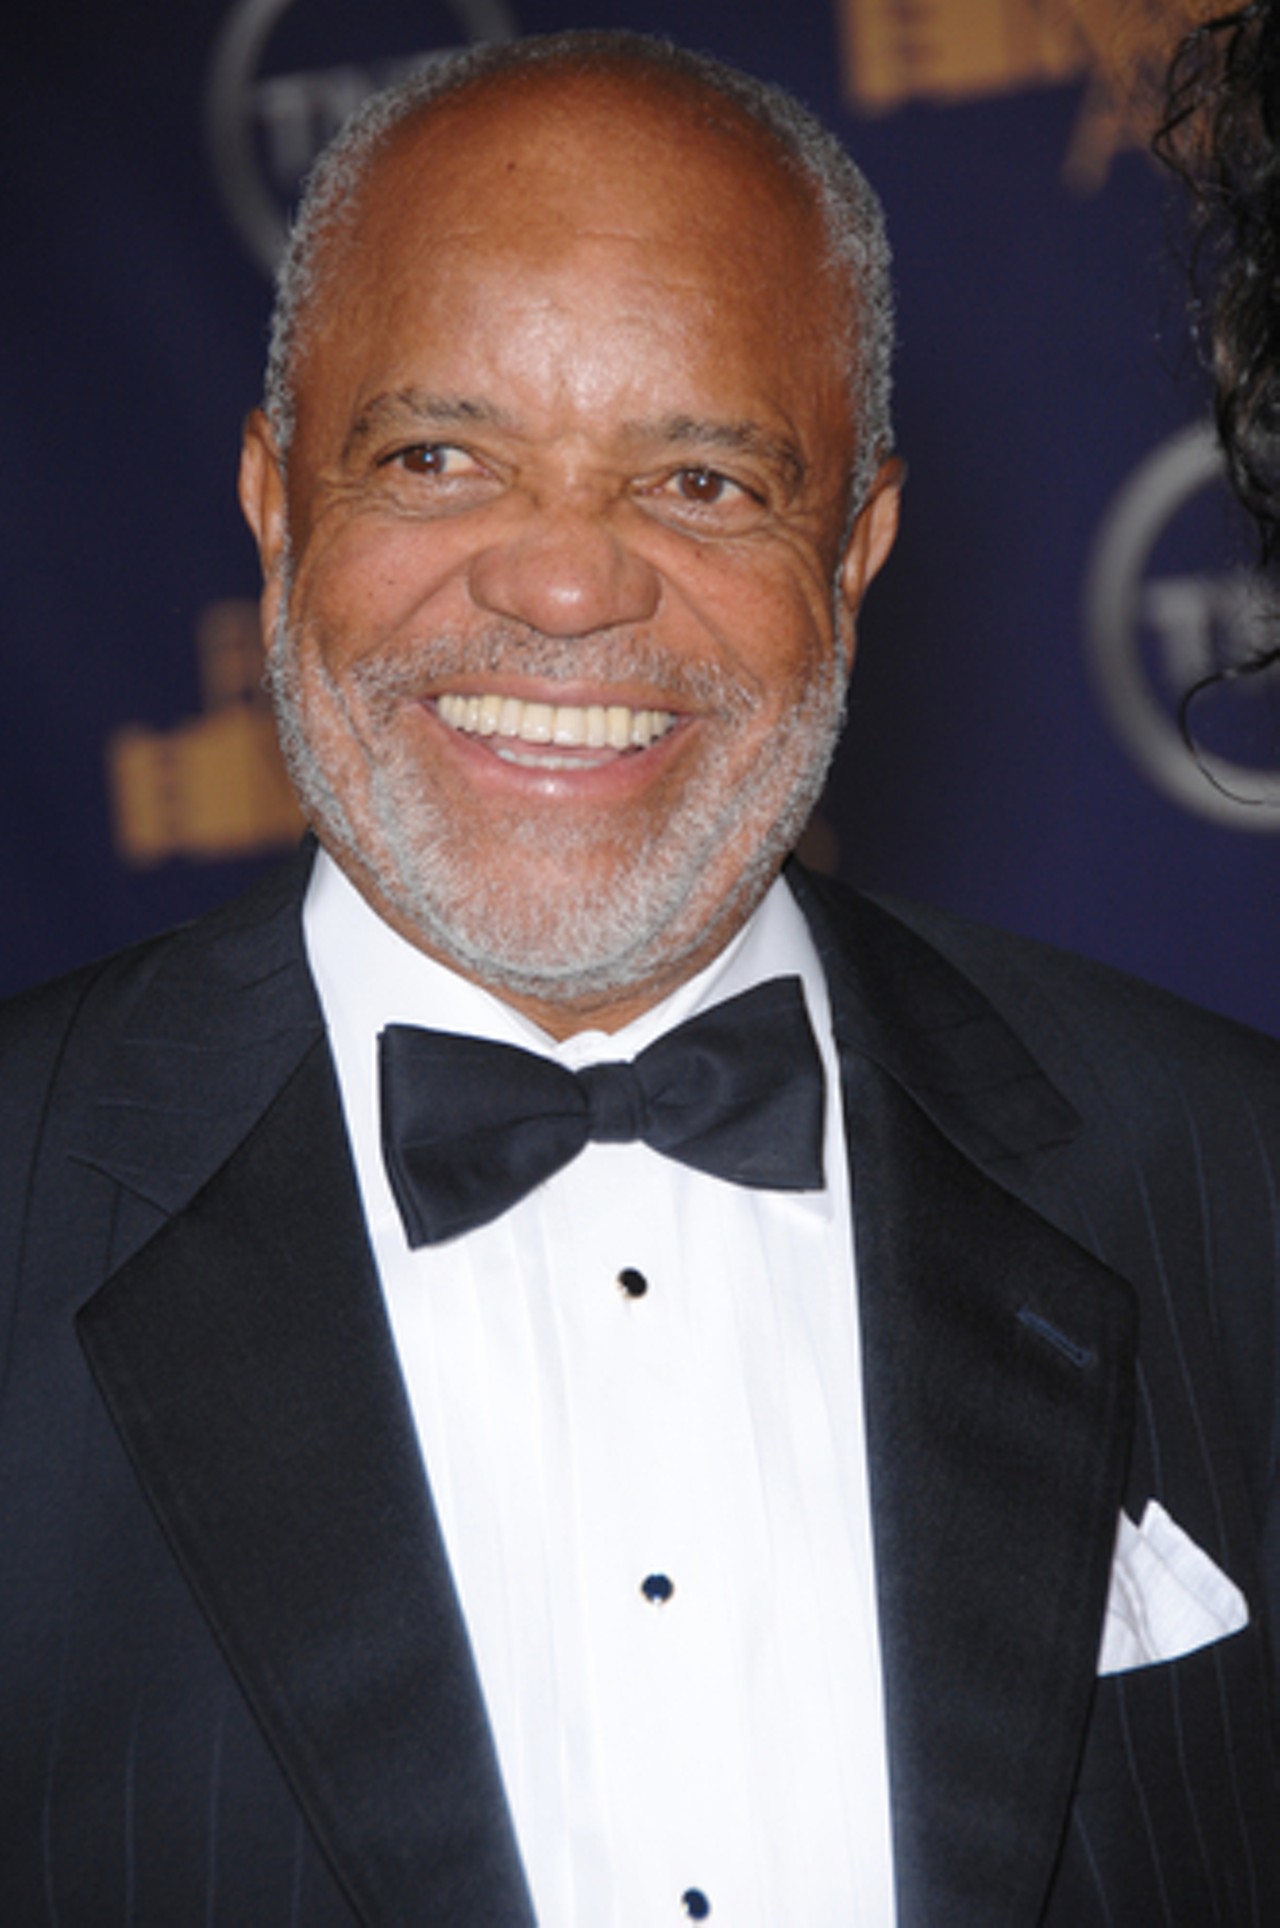 Northeastern: Berry Gordy Jr. 
Born in Detroit, Berry Gordy Jr. was the founder of Motown Records, one of the most successful and influential record labels in the history of American music. Gordy’s contributions to the music industry revolutionized popular music and helped to promote Black artists on a global scale. The producer, who is currently 94 years old and living in Los Angeles, went to Northeastern High School, which closed in 1982. 